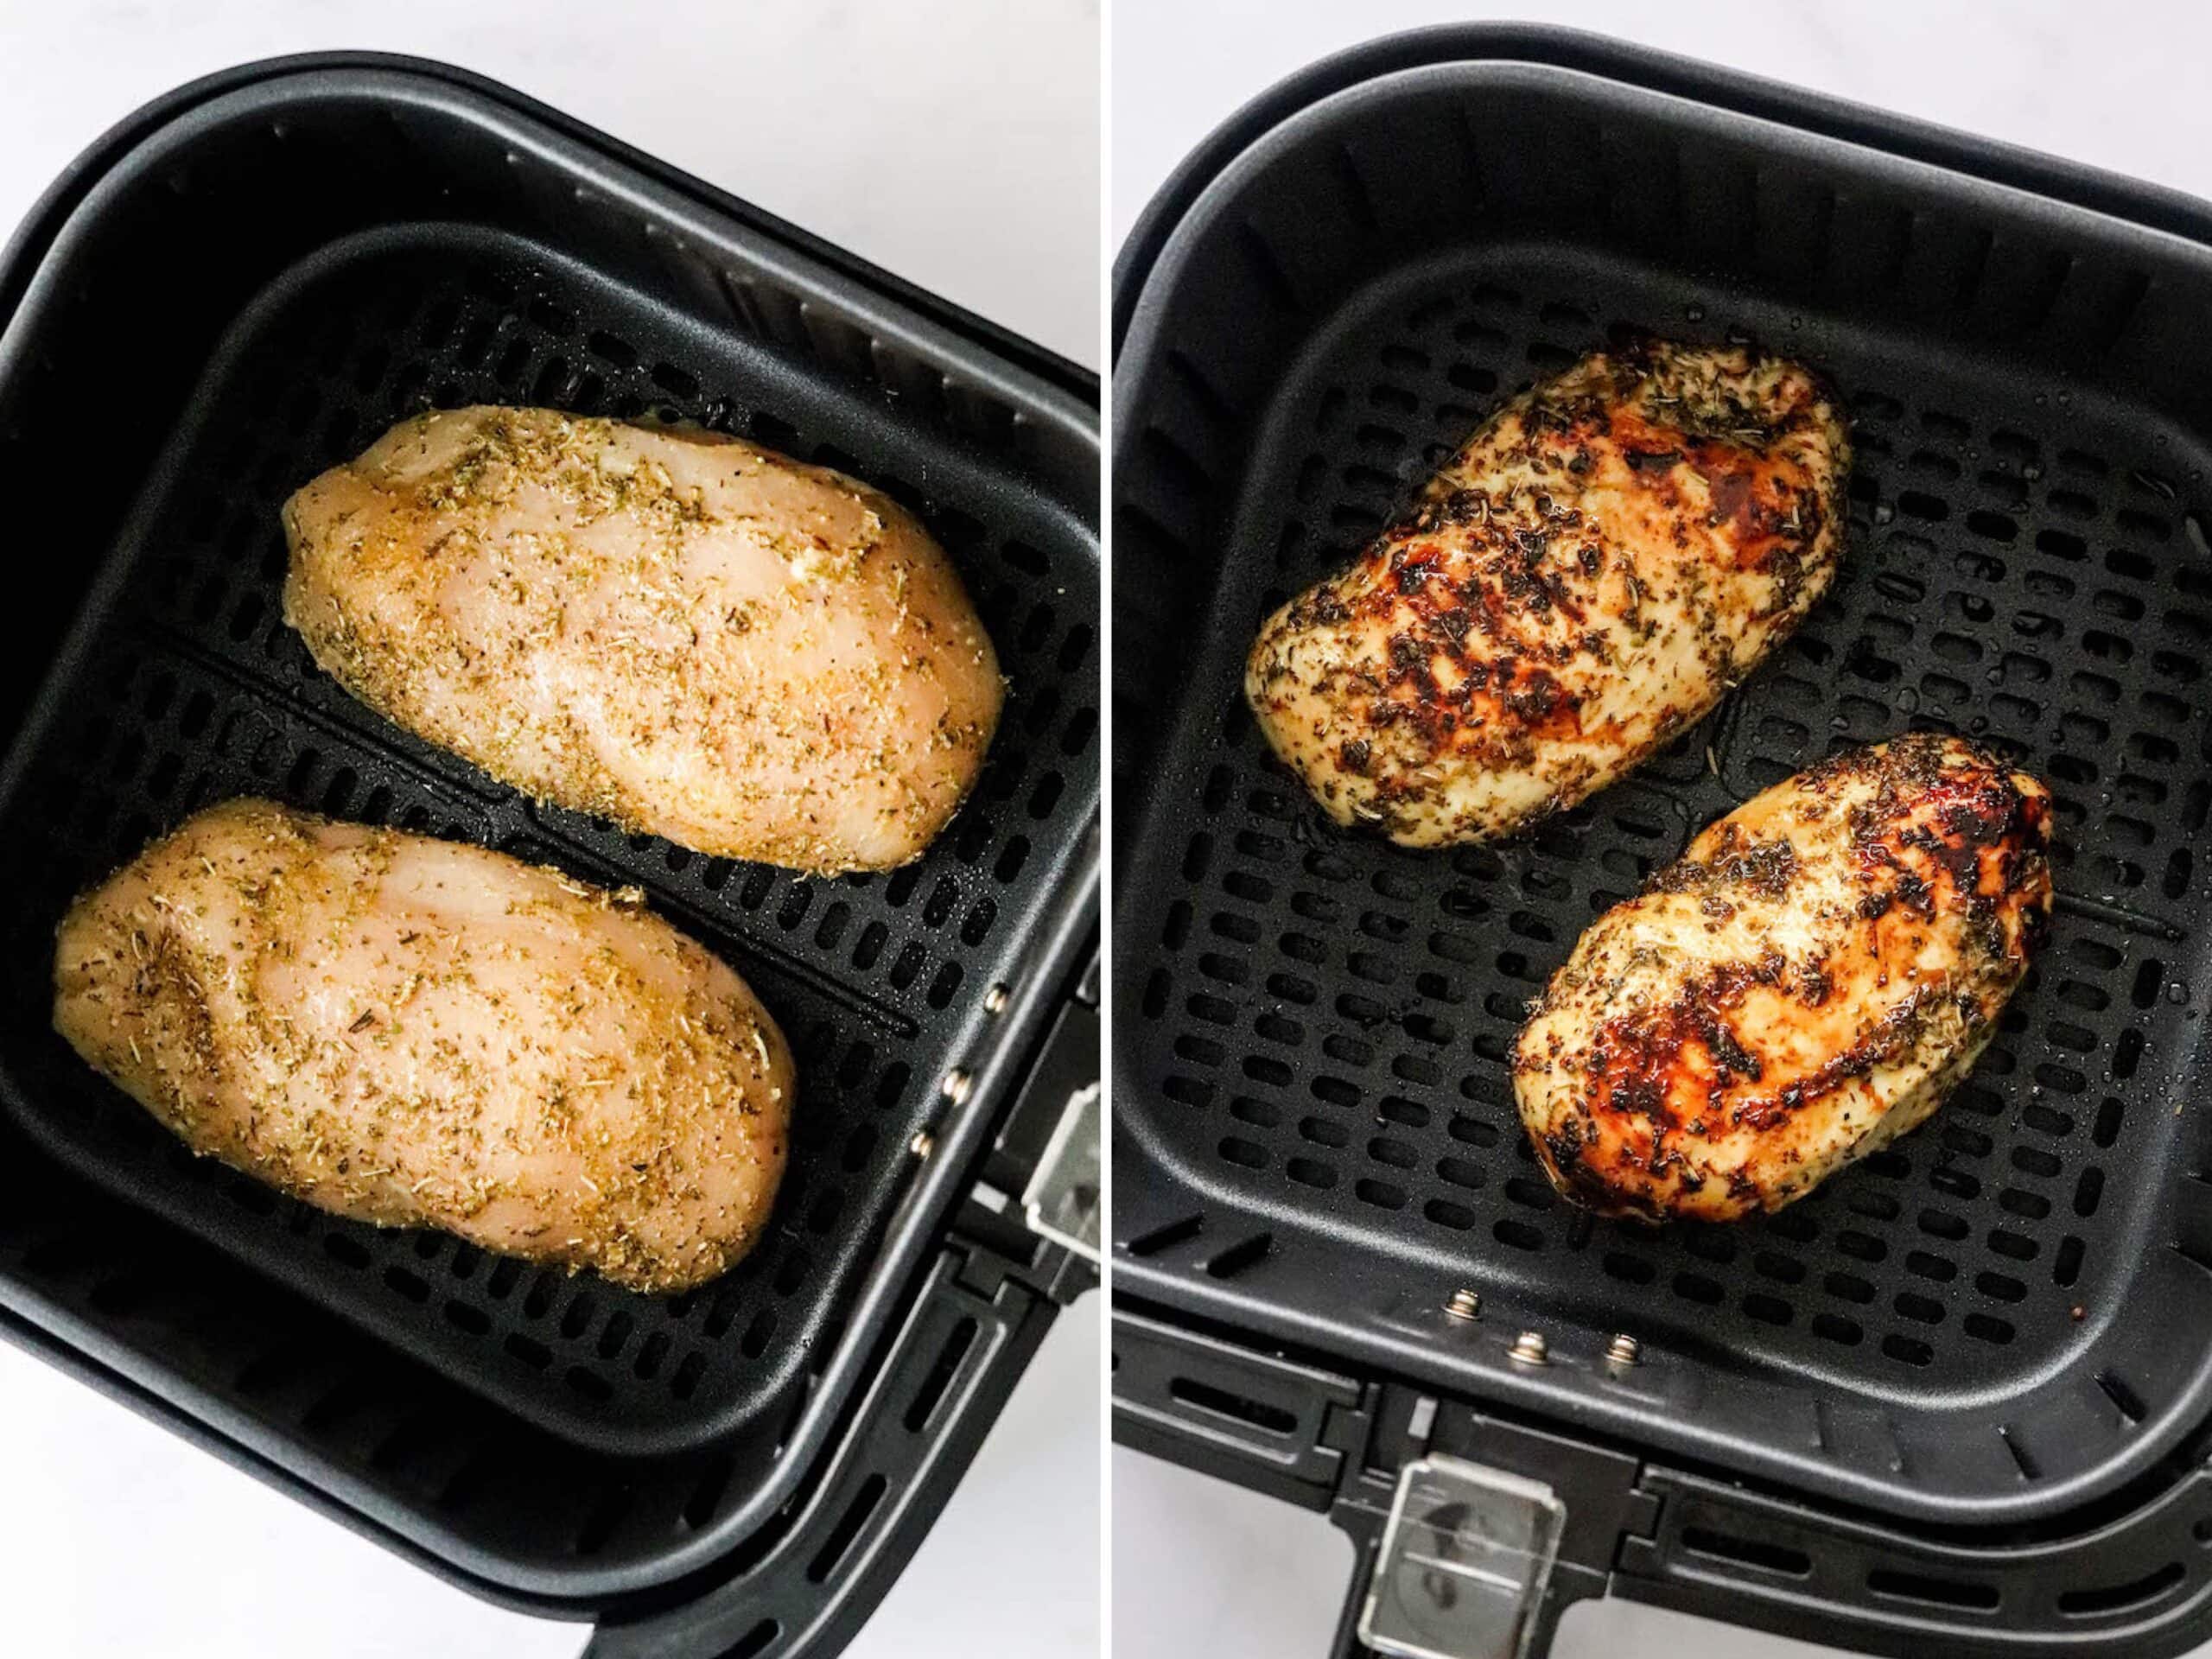 Side by side photos of chicken breasts in an air fryer basket, before and after being cooked.